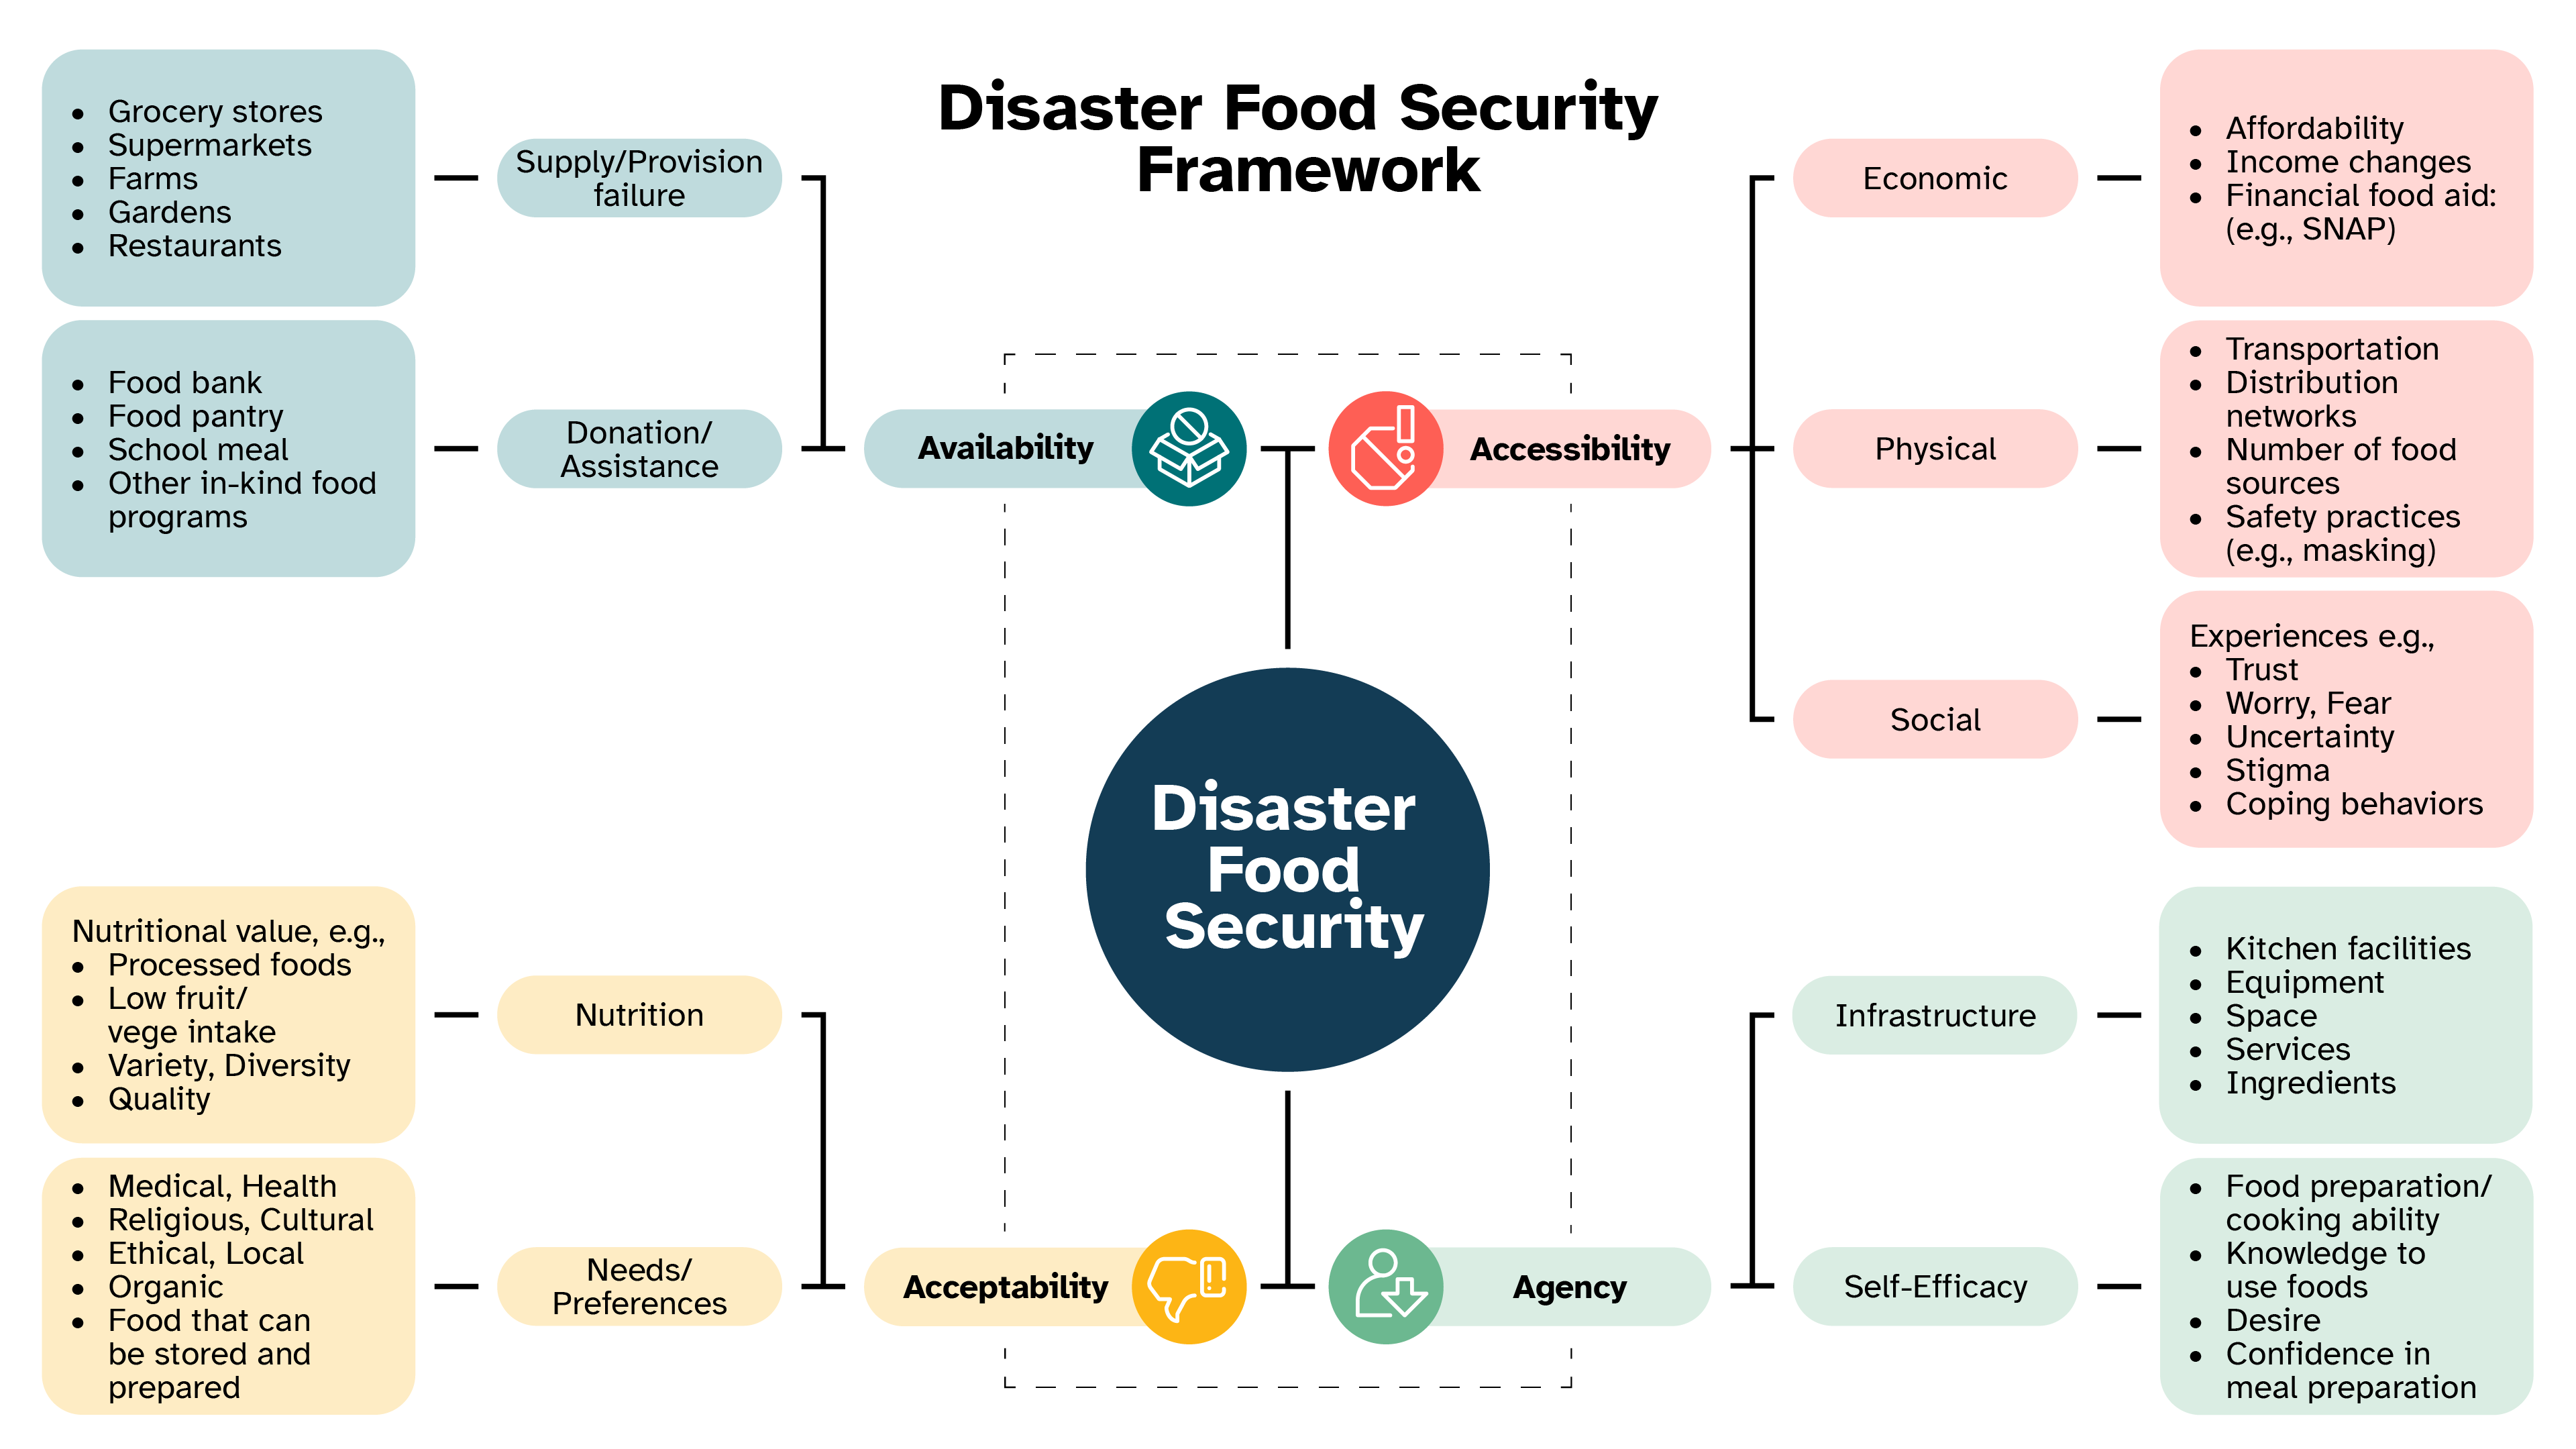 FSA research reveals the scale of risky food safety behaviors